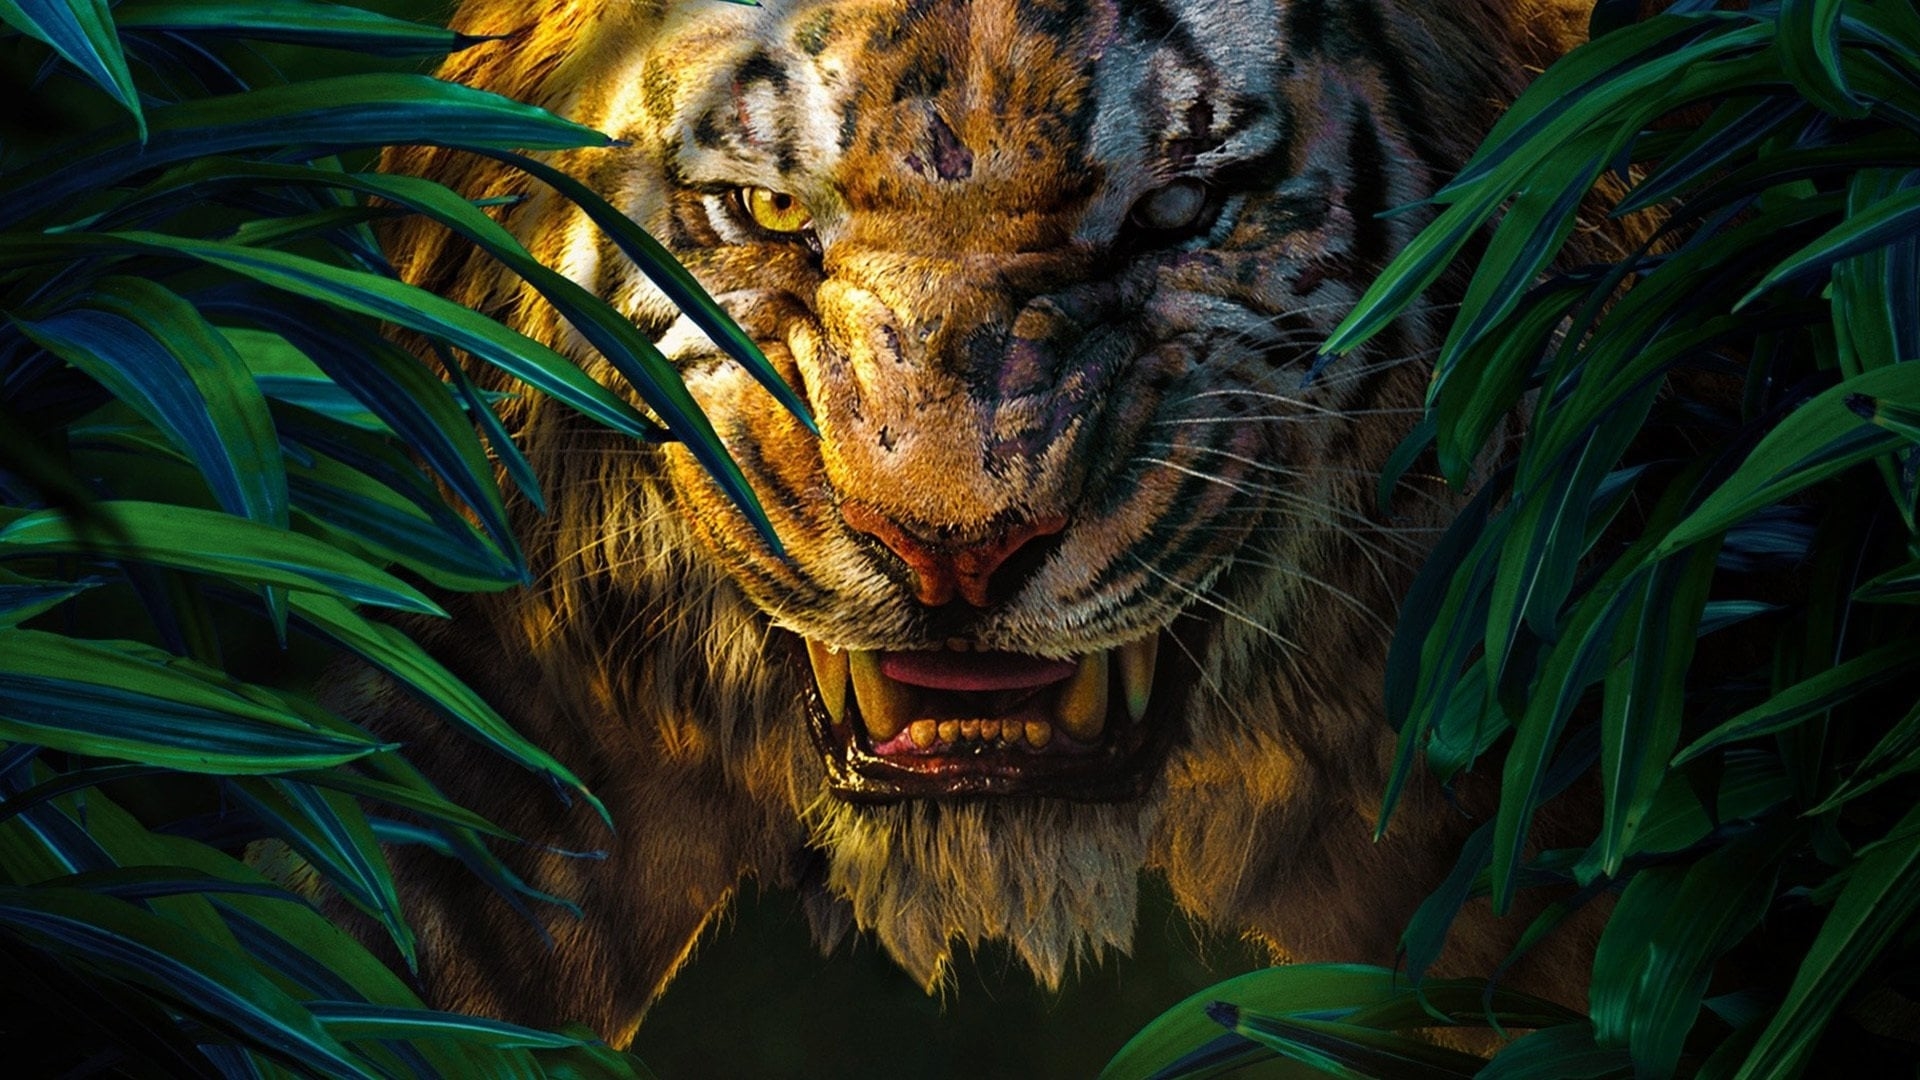 free for apple download The Jungle Book